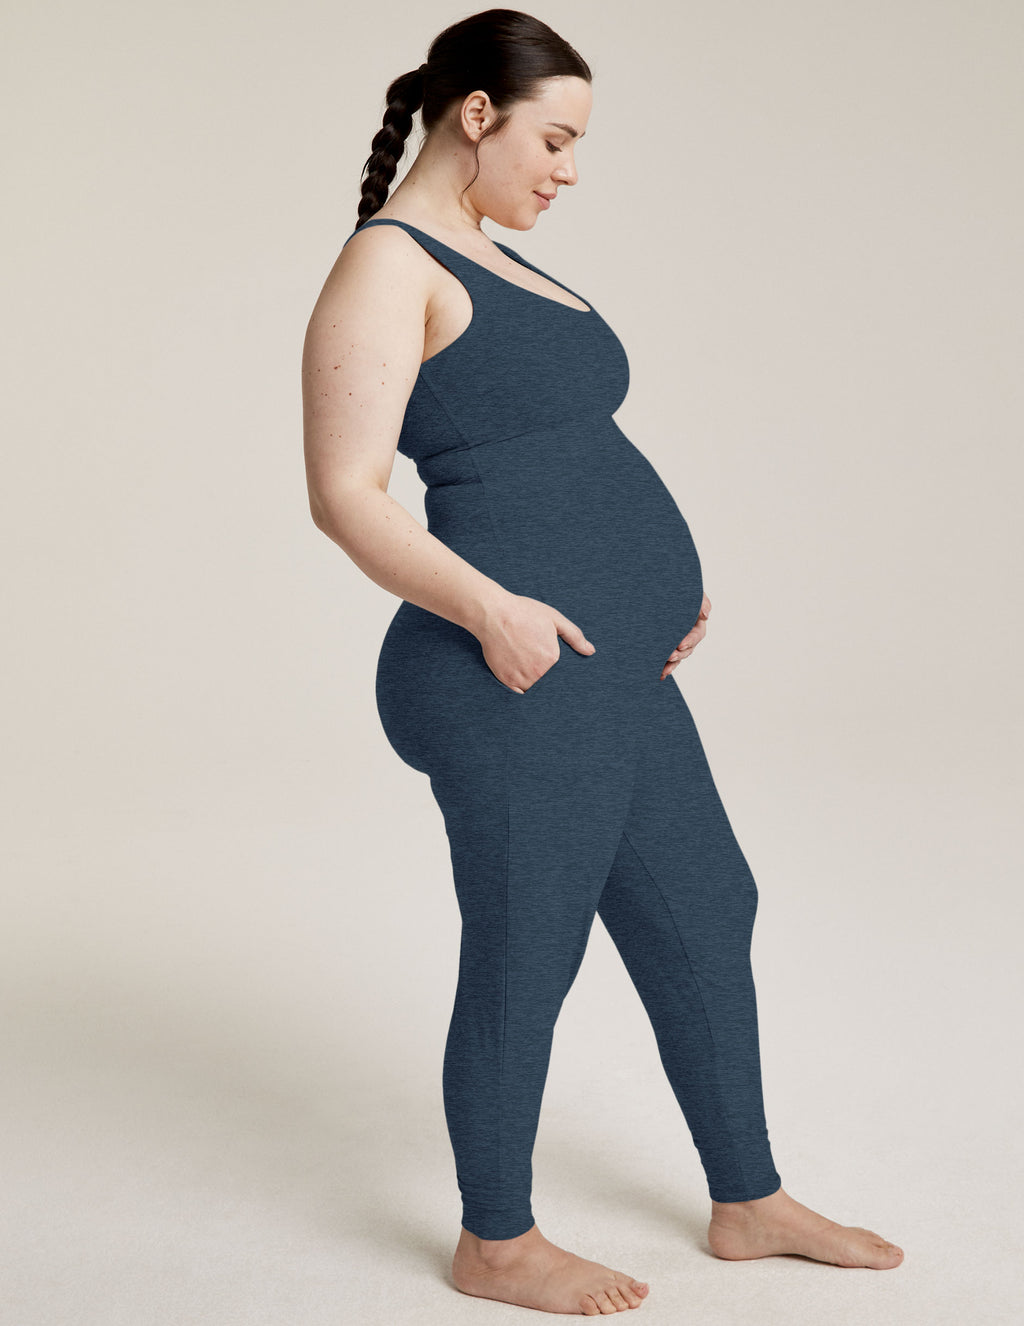 Spacedye Grow In Comfort Maternity Jumpsuit Featured Image